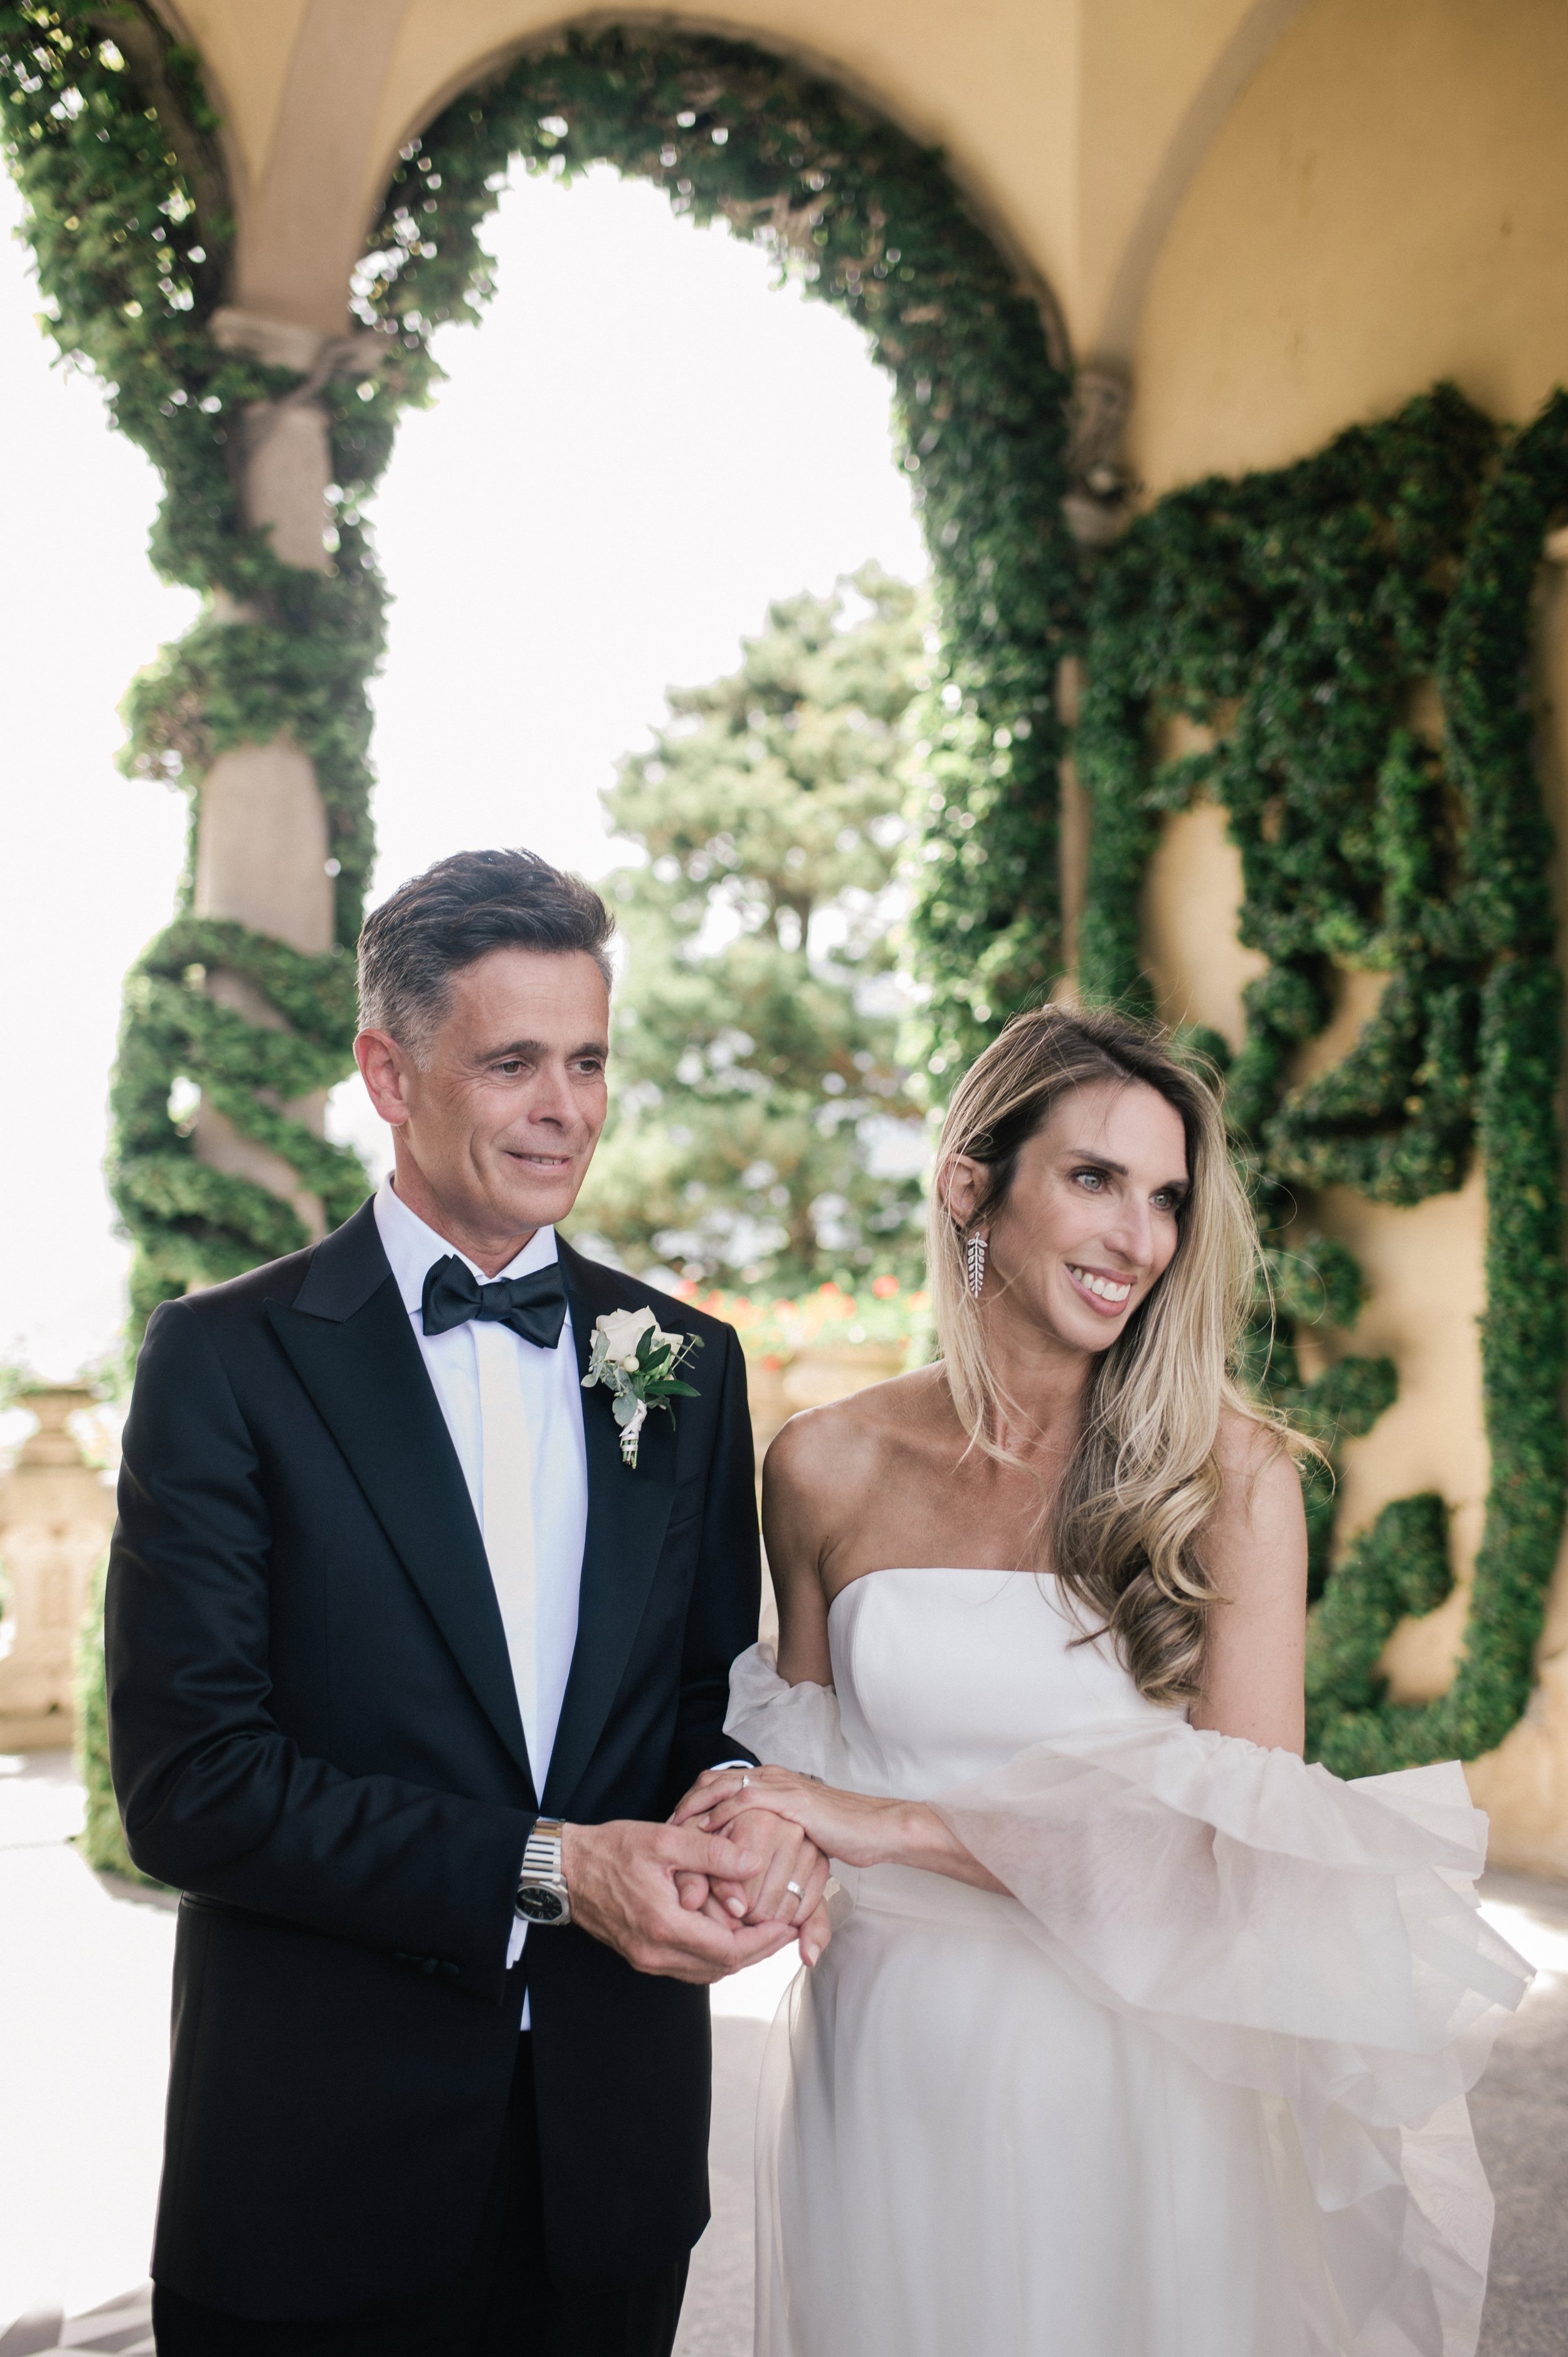 Beautiful bride Alice wore the Oliver wedding dress, sheer organza Mayfair skirt and Issa shrug.